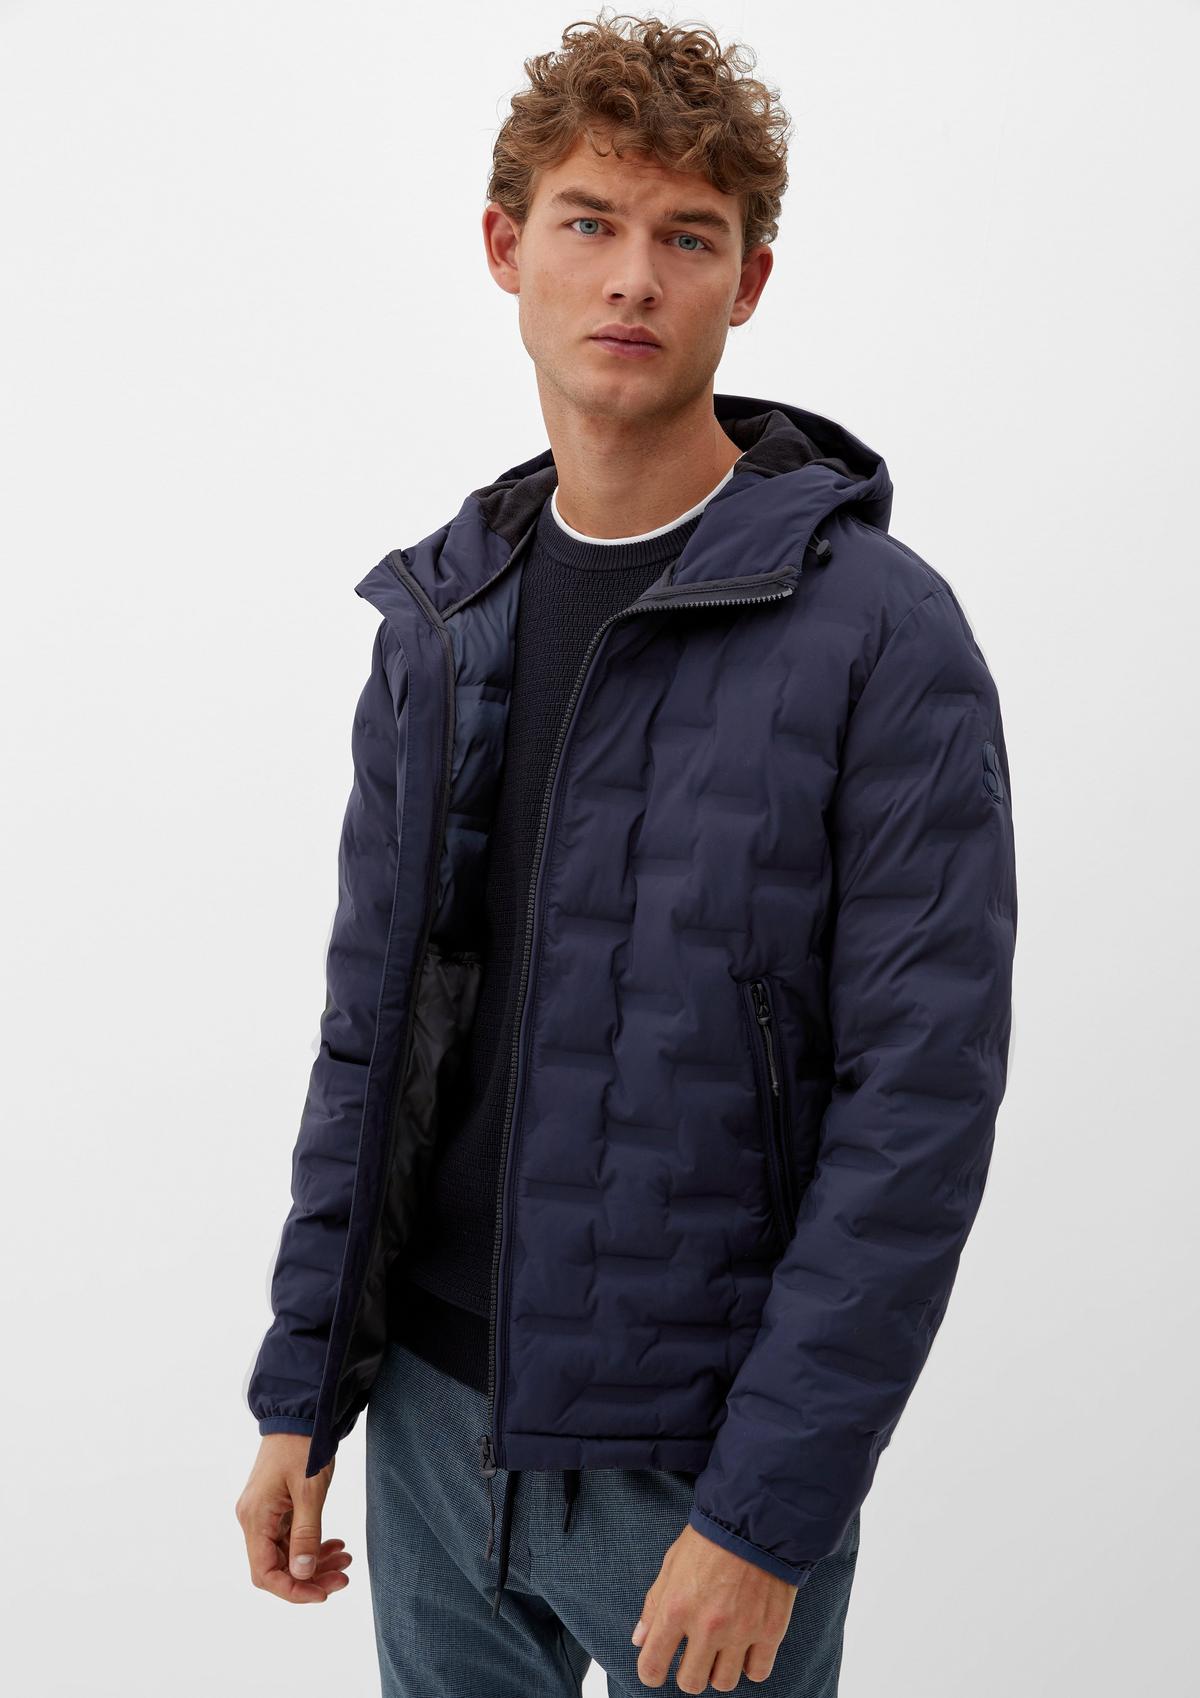 Softshell jacket with stand-up - navy collar a